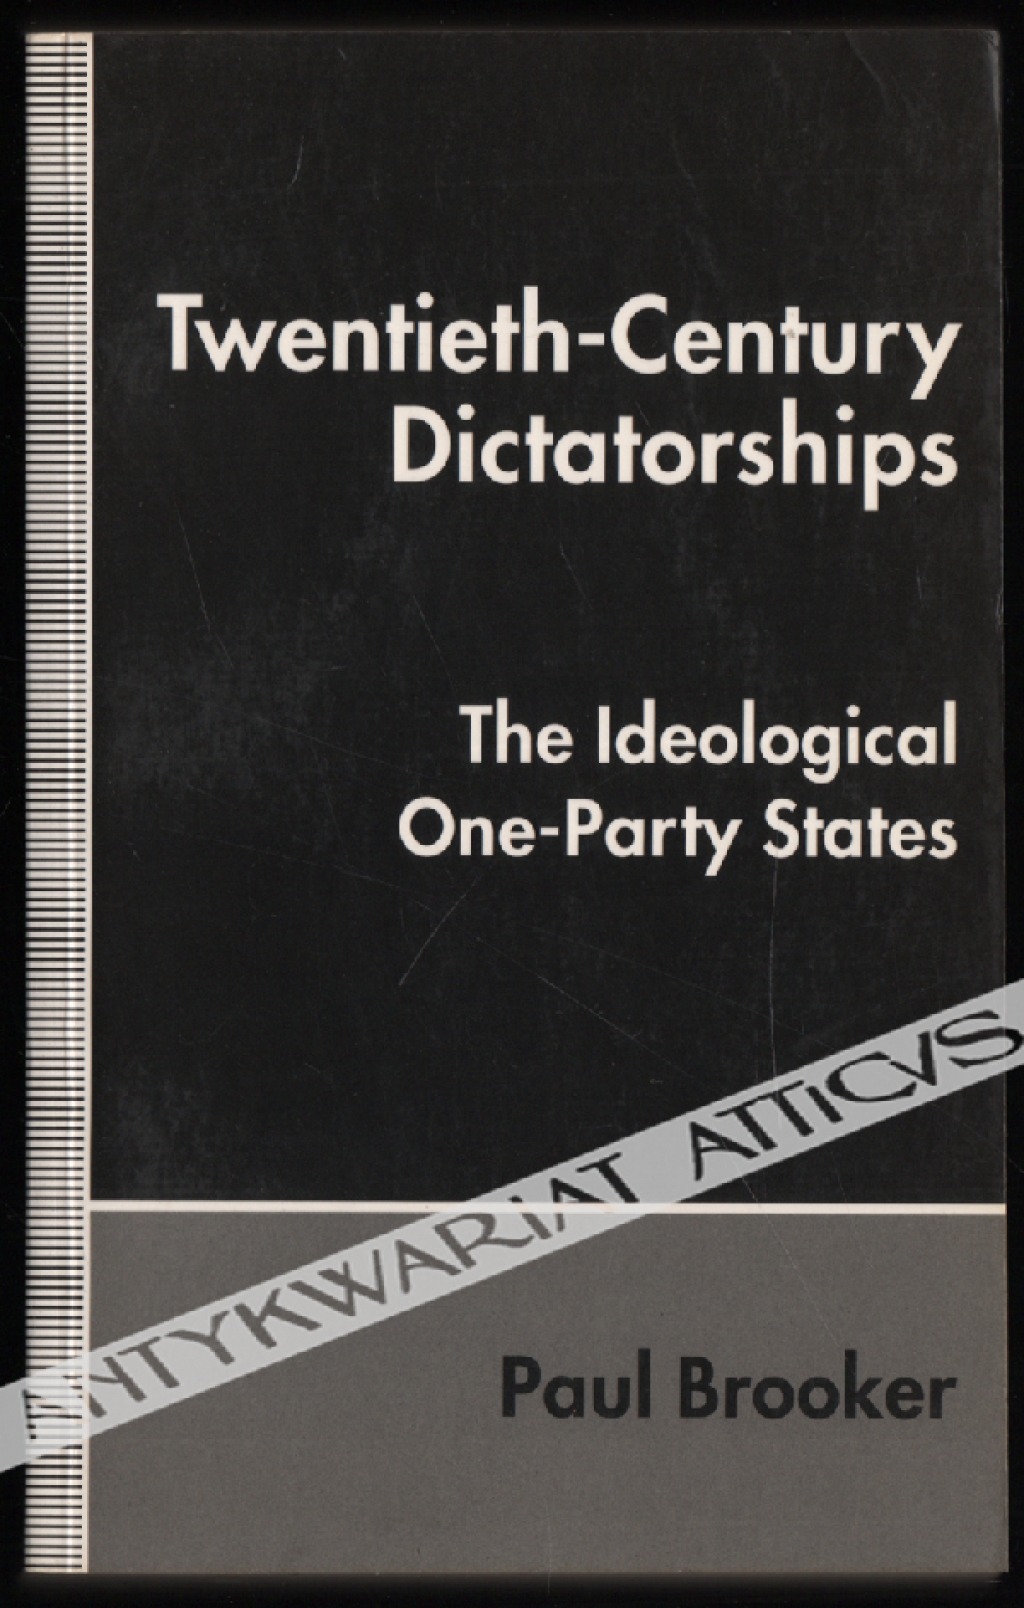 Twentieth-Century Dictatorships. The ideological One-Party States